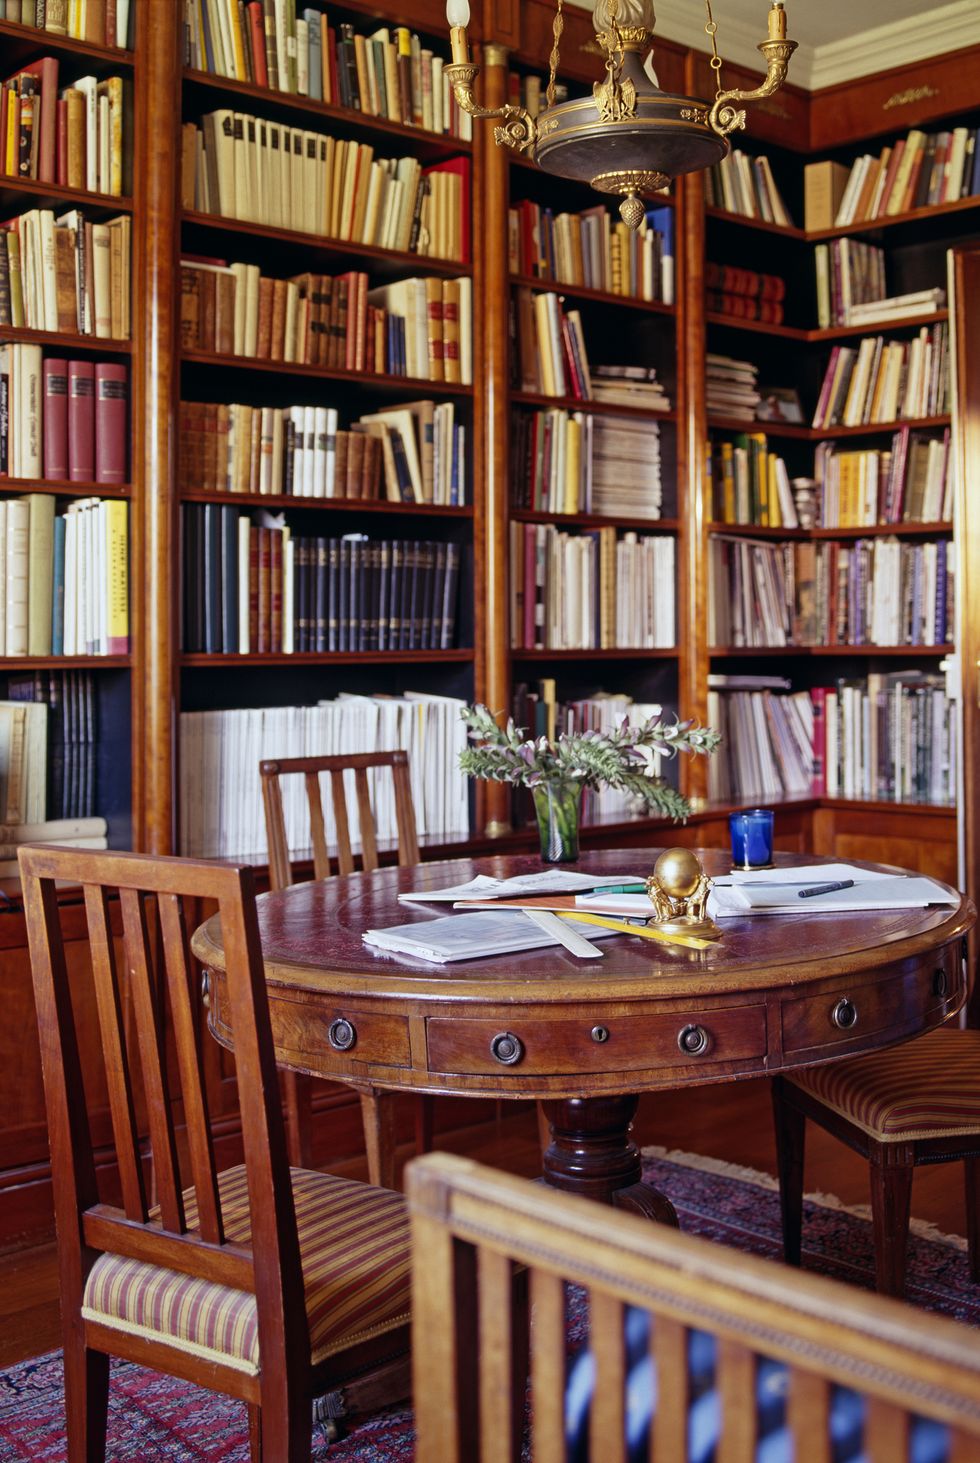 Large number of books kept on the bookshelves in the reading room